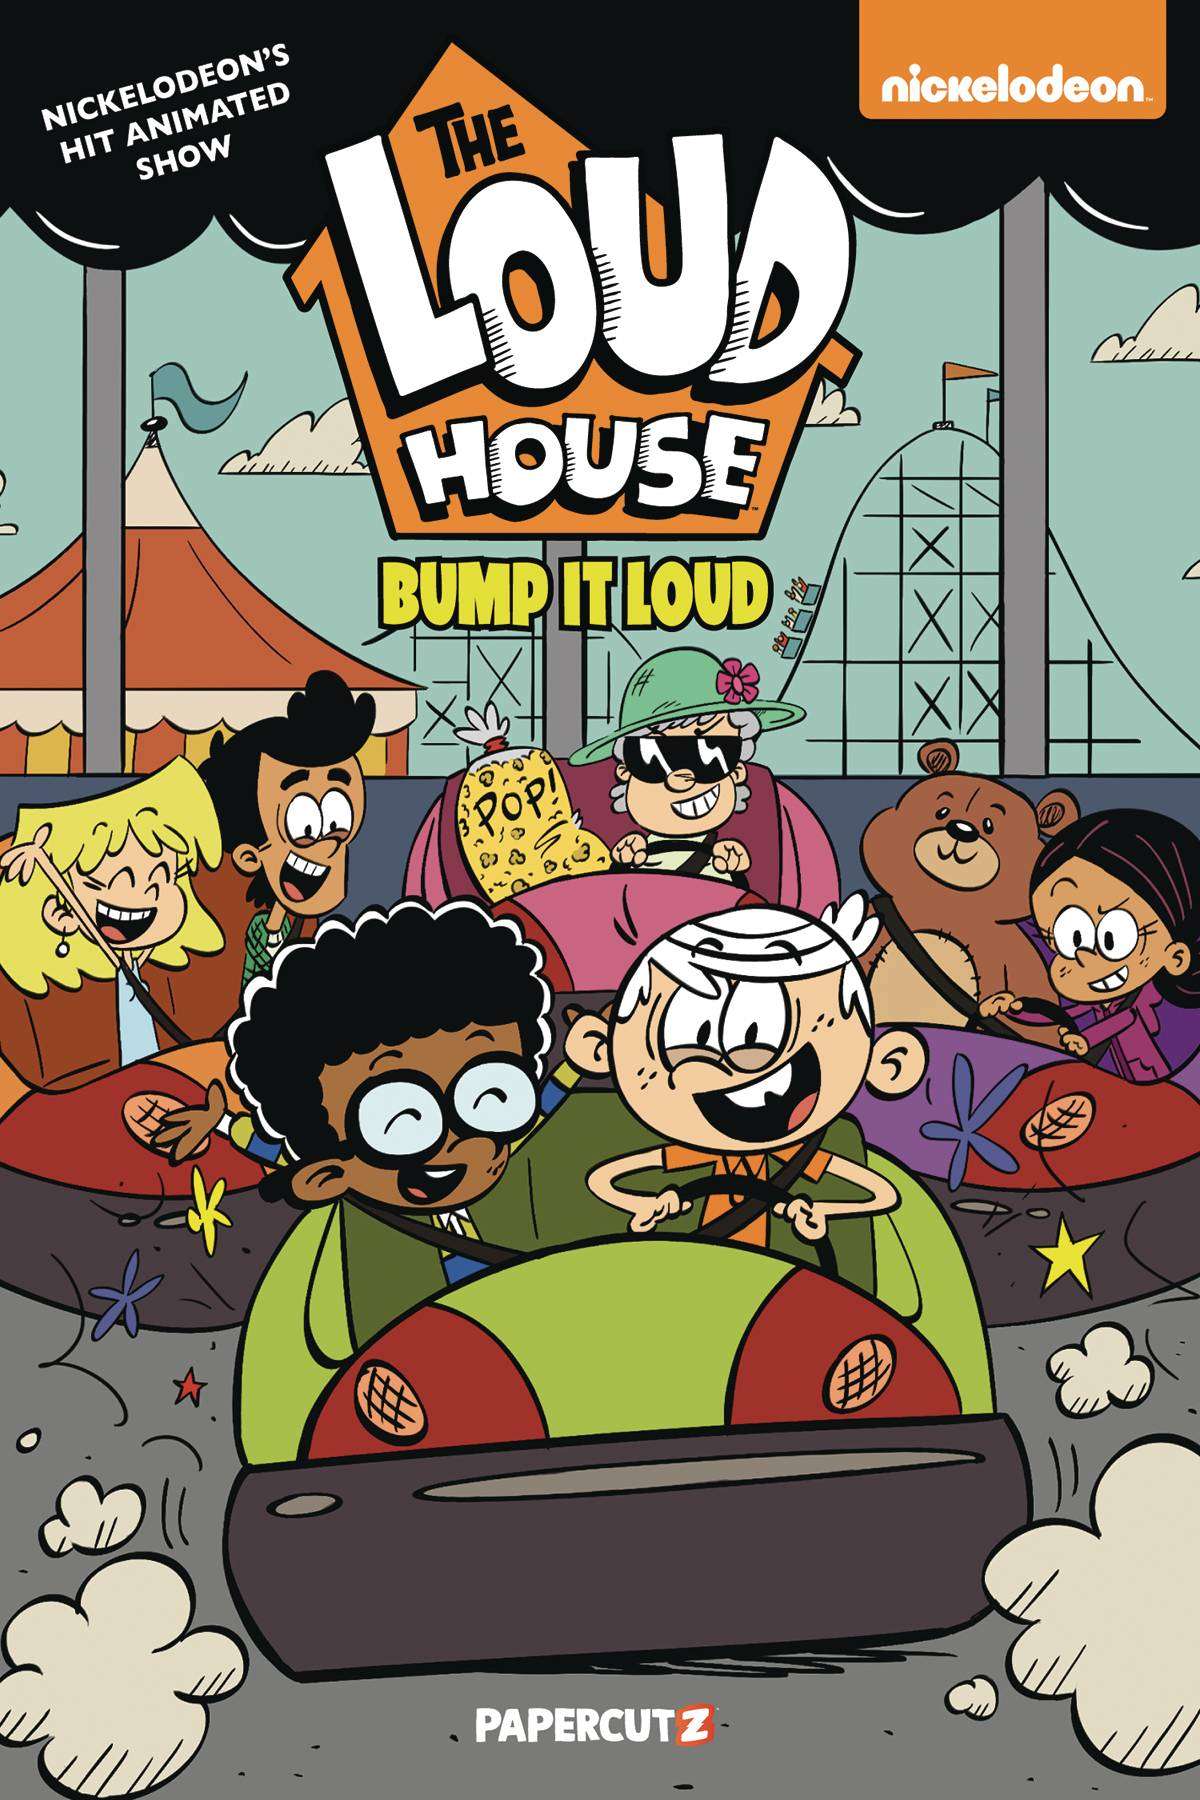 The Loud House: The Complete First Season (DVD) 